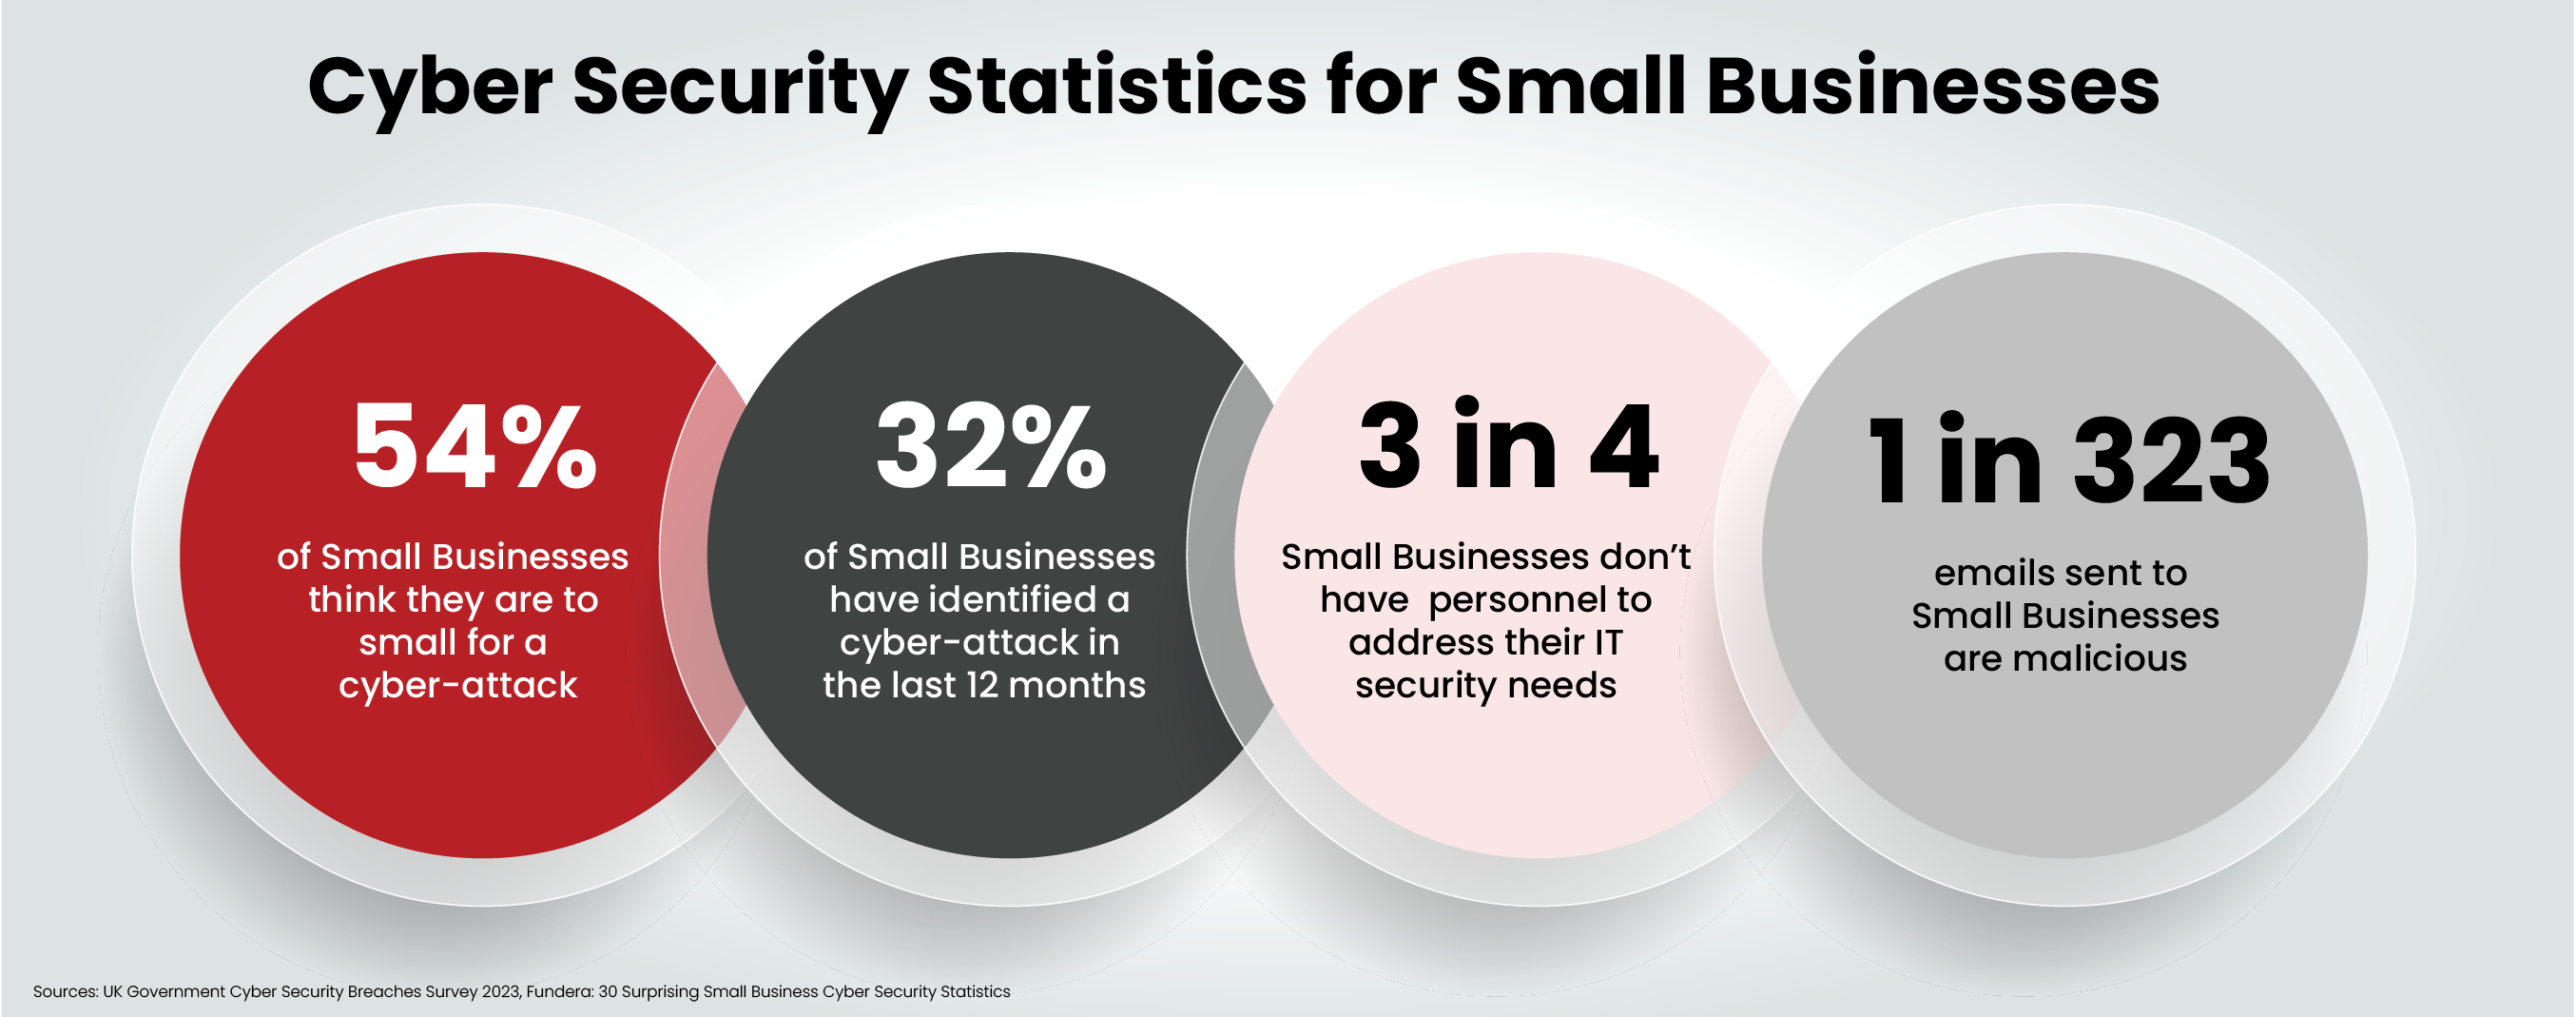 Cyber Security for Small Businesses Statistics